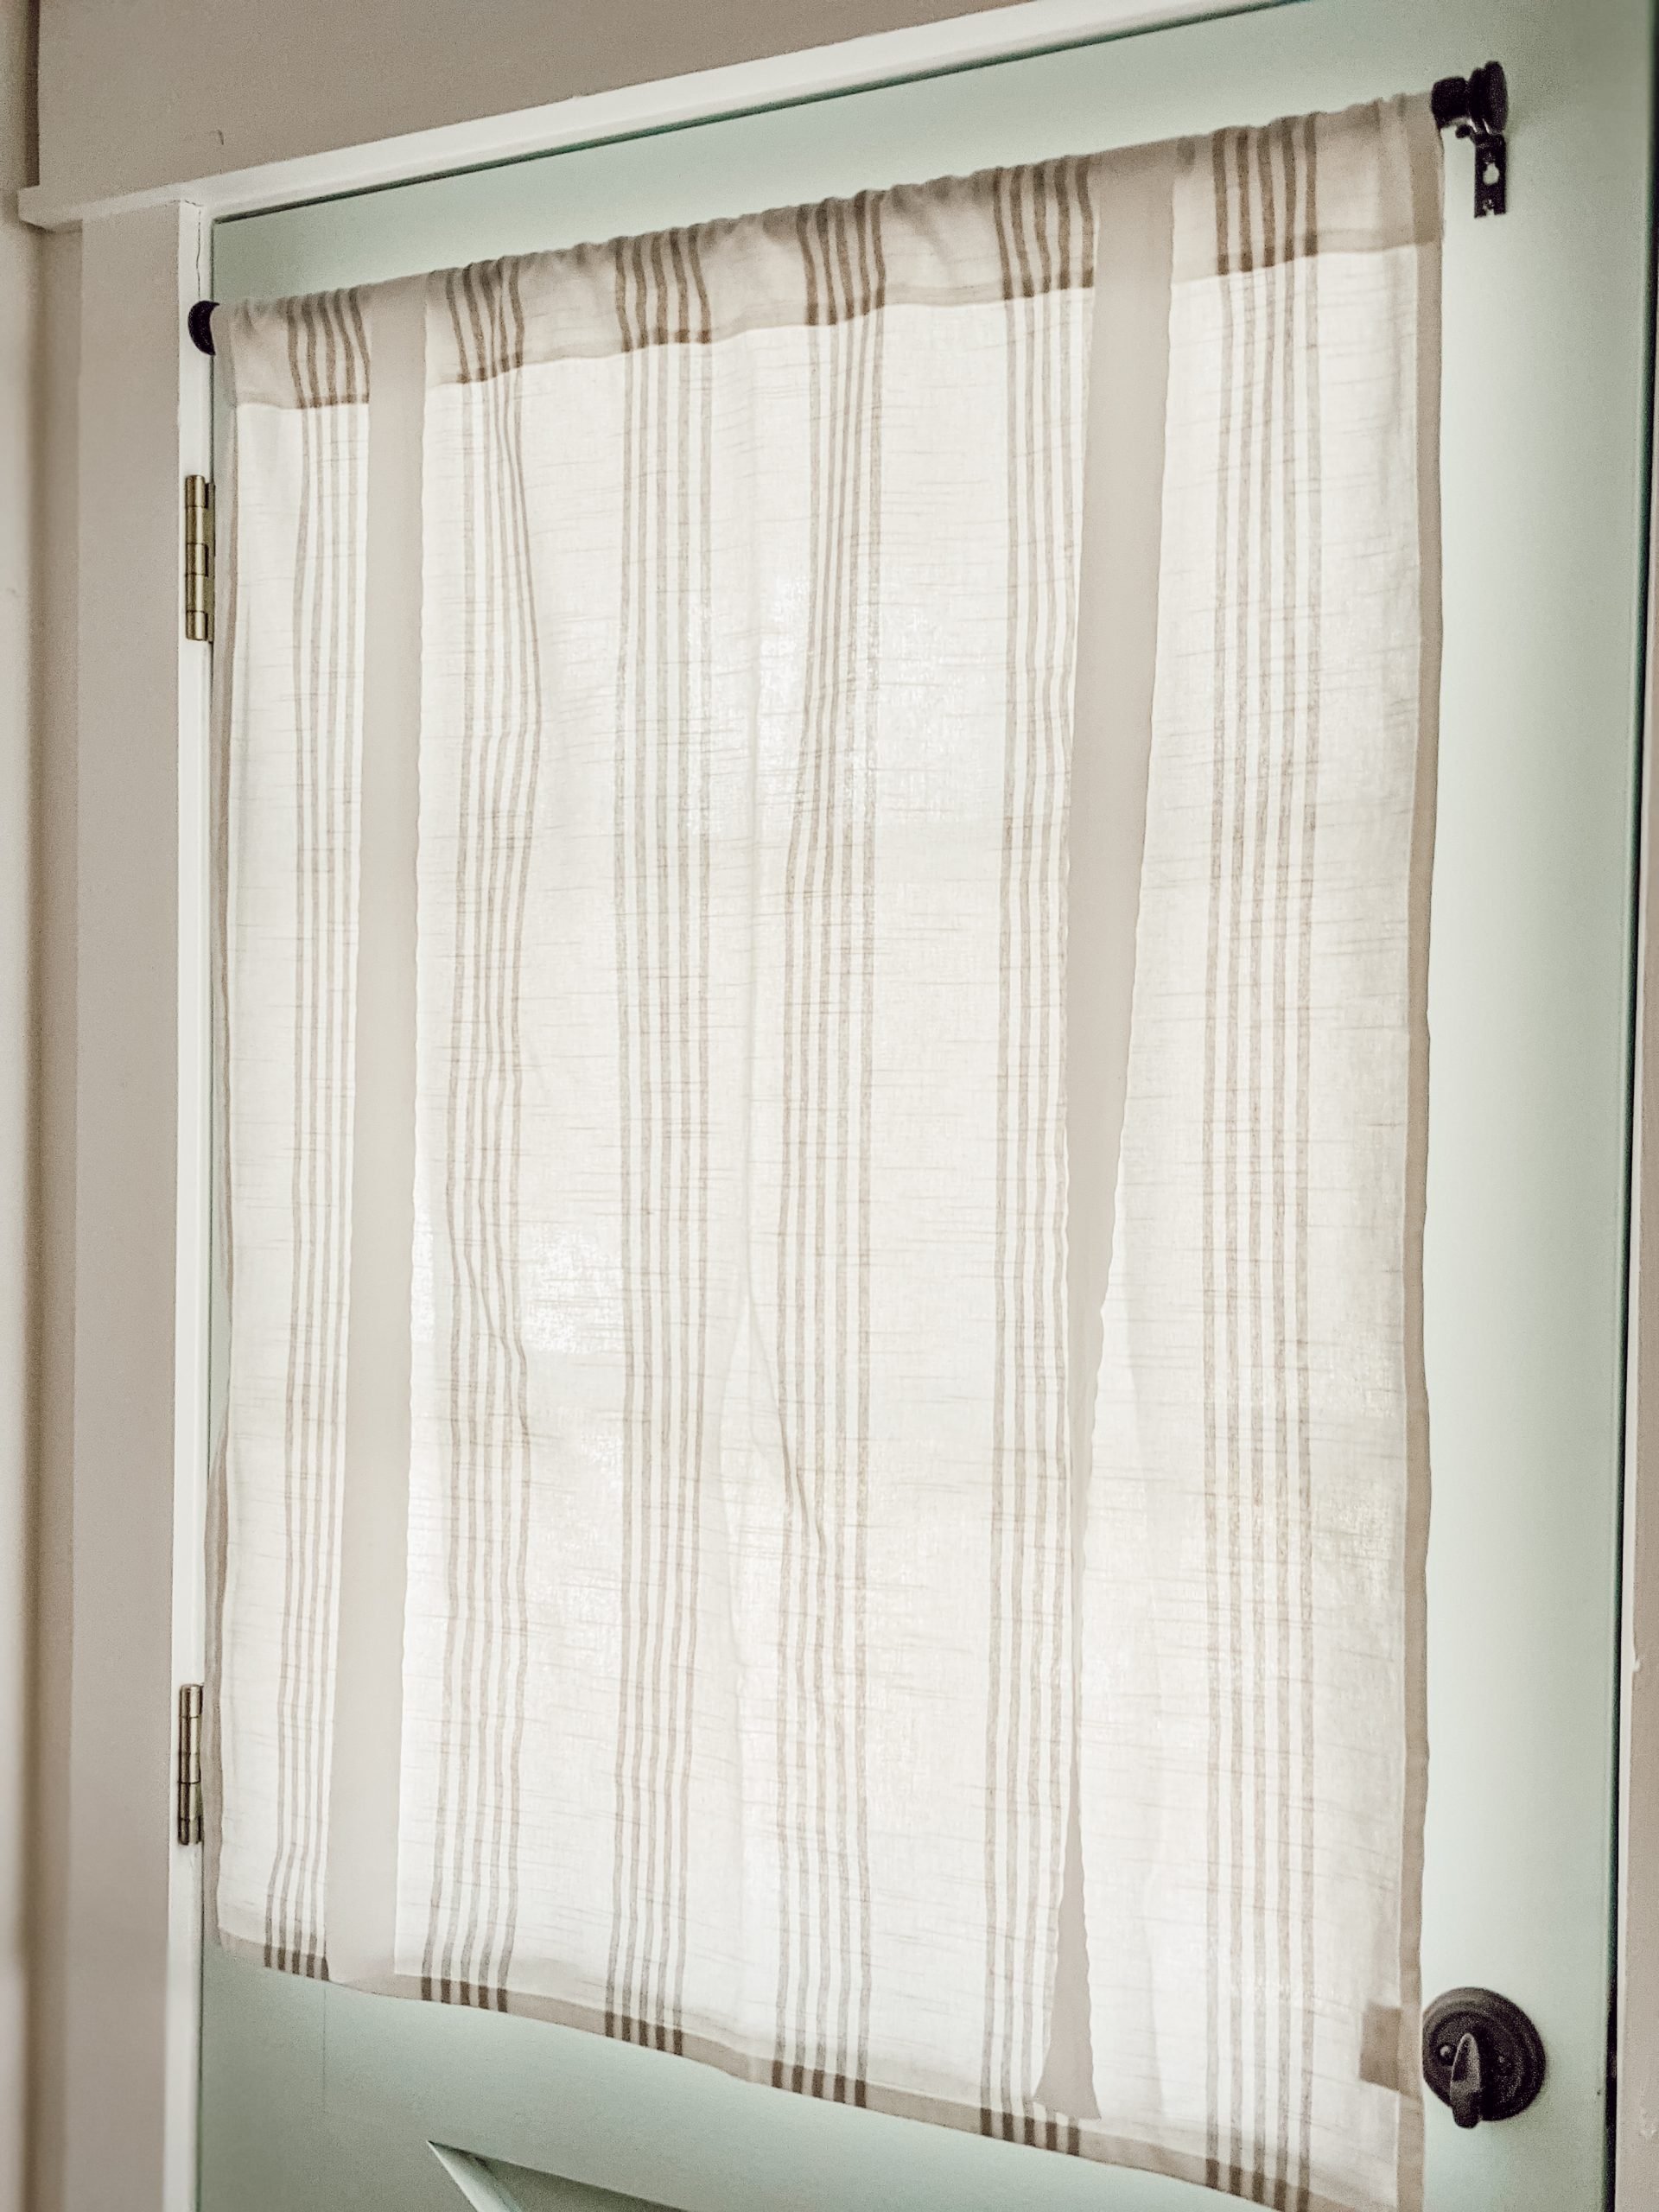 open ties on white and gray tie-up curtains